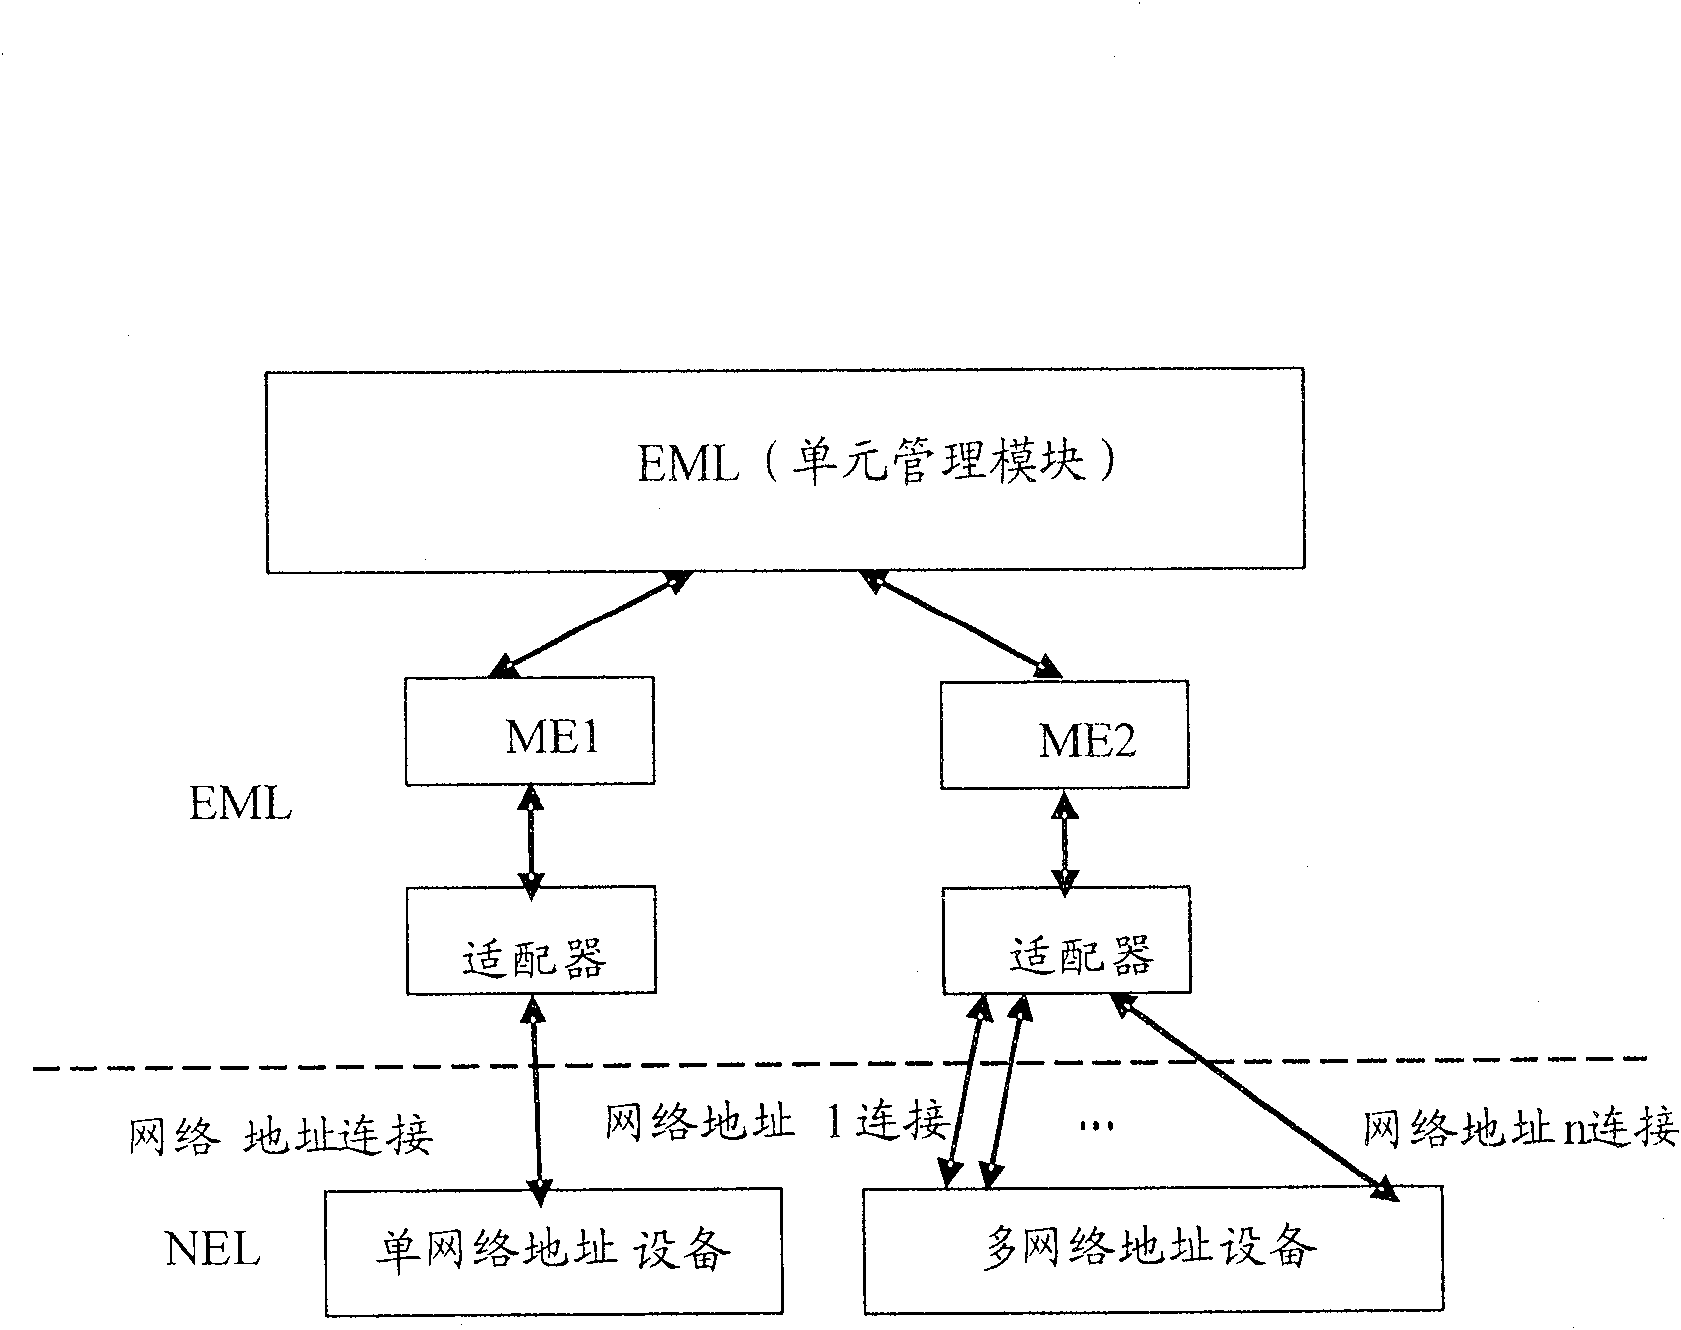 Network management system and network management method using the system